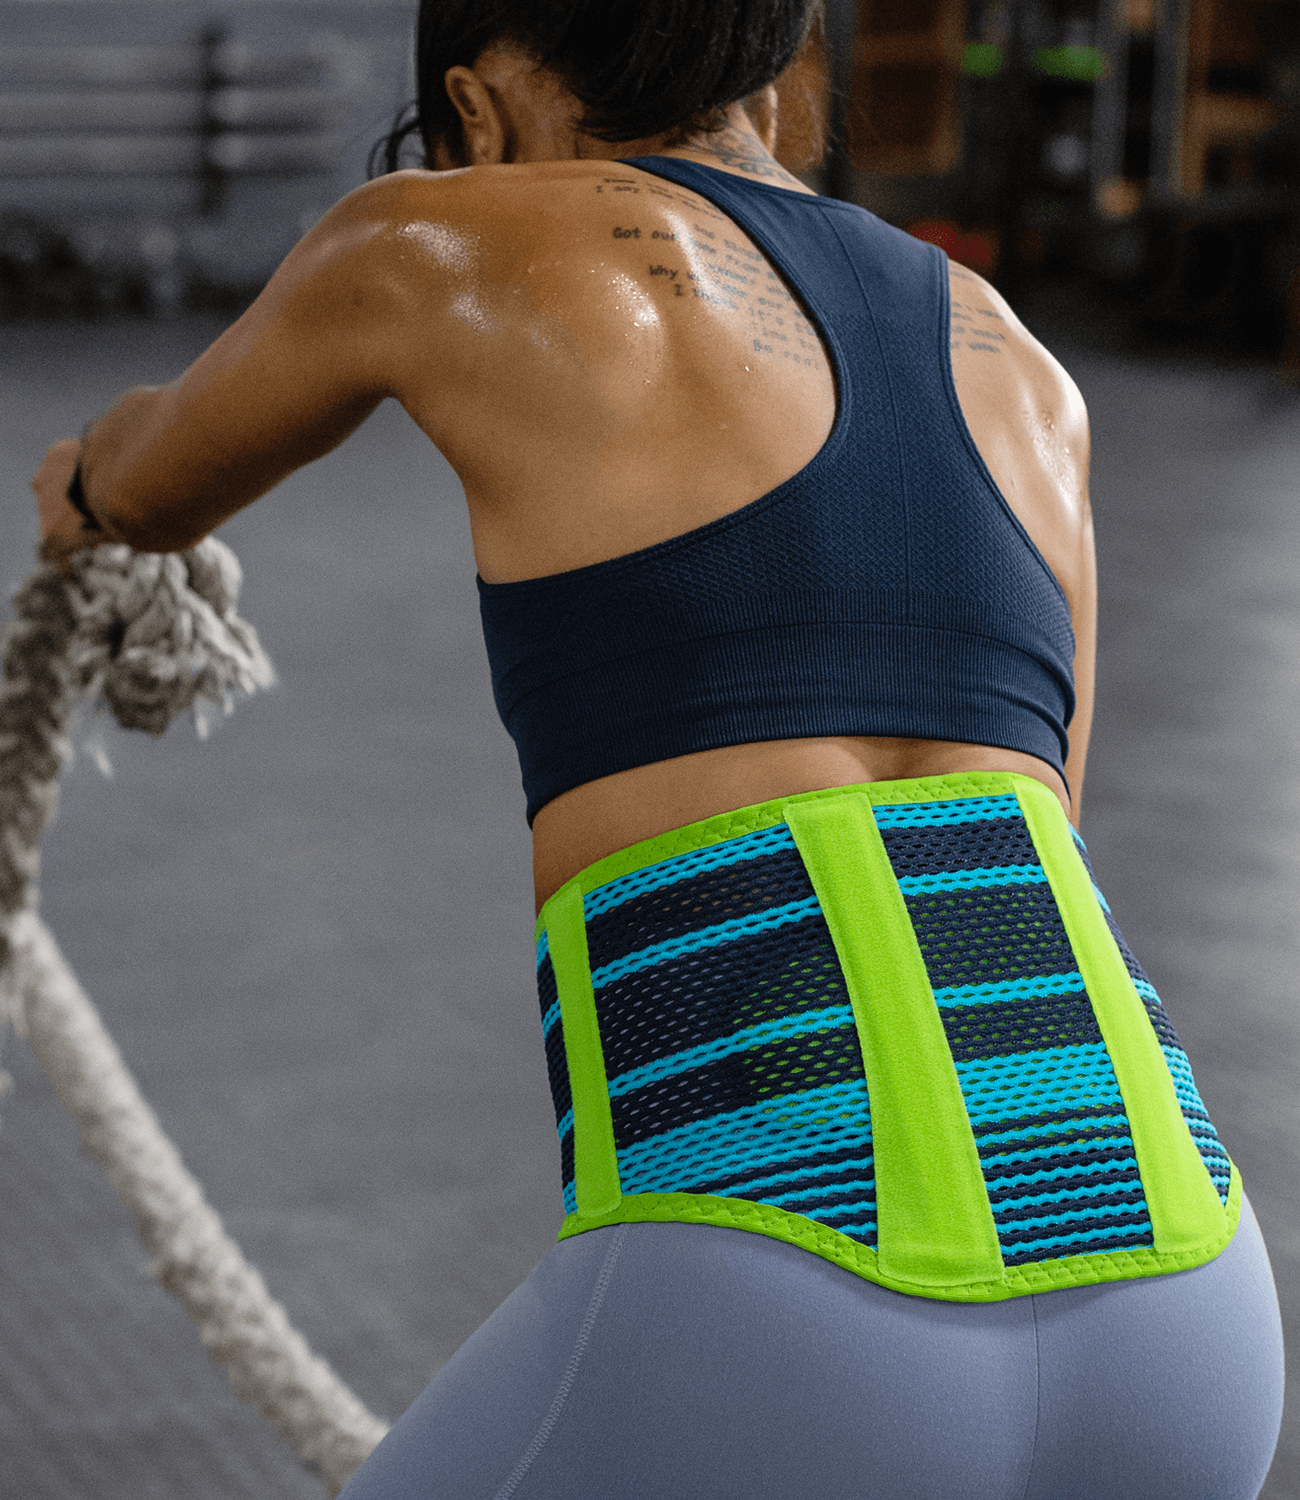 Bauerfeind Sports Back Braces & Supports